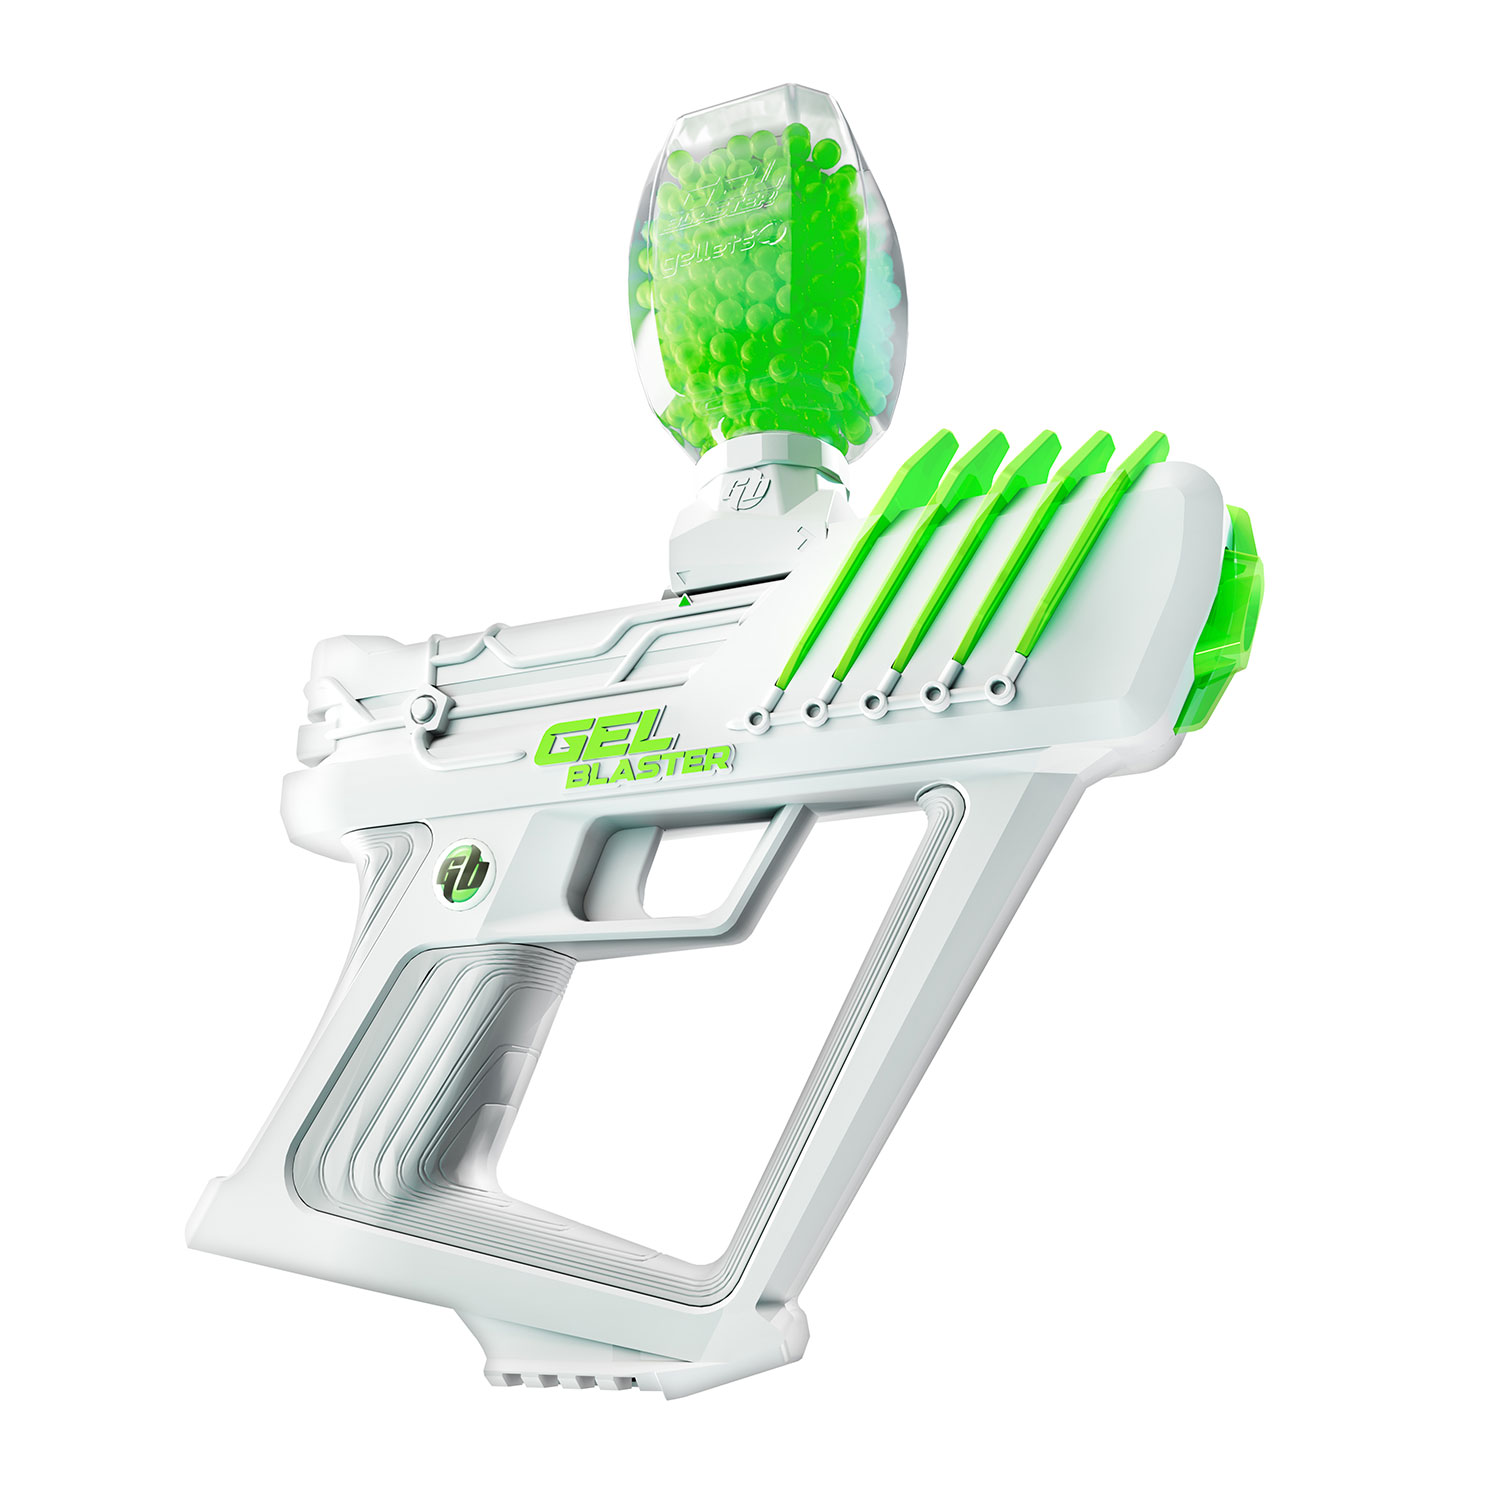 GEL BLASTER Surge with 10,000 Pellets - White & Green - Free UK Delivery -  Ride + Glide